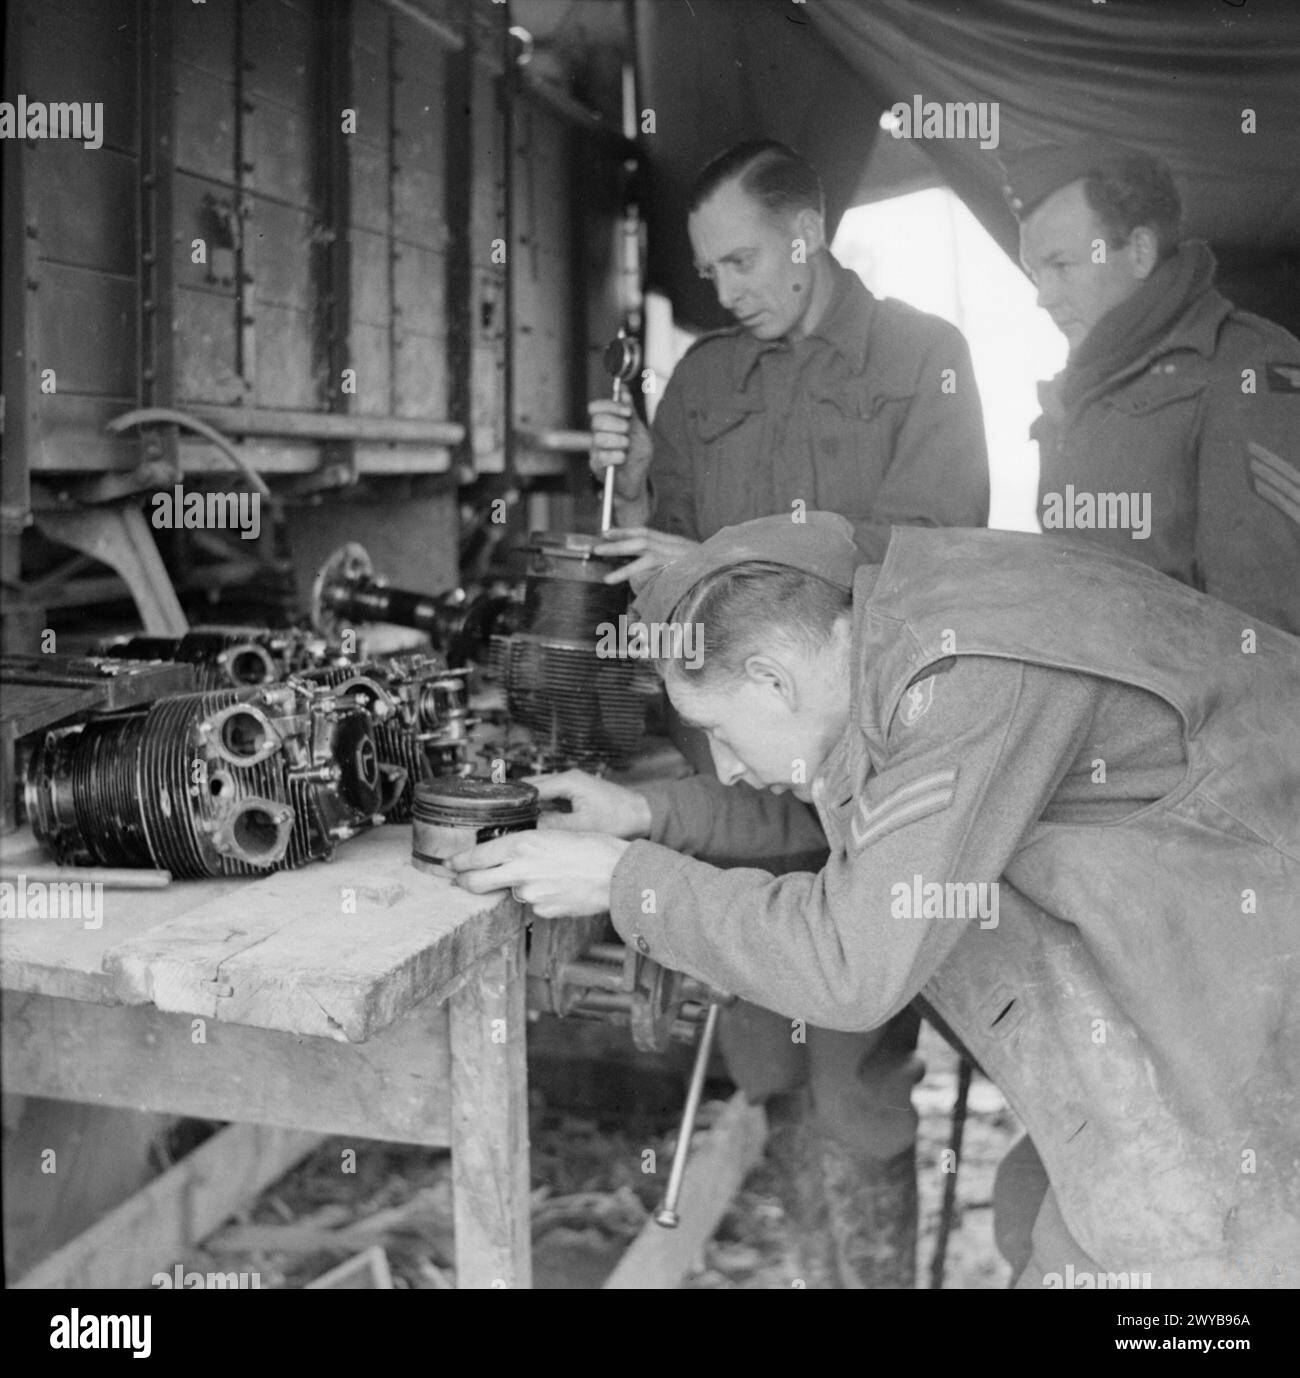 ROYAL AIR FORCE: ITALY, THE BALKANS AND SOUTH EAST EUROPE, 1942-1945. - Fitters strip down the engine of a Taylorcraft Auster Mark IV of No. 654 (AOP) Squadron RAF for repair at their mobile workshops at Forli, Italy. Checking a cylinder-head in the foreground is Corporal G Oakley of Blackheath, Birmingham, while behind him are Leading Aircraftmen W Jenkinson of Shelley, Huddersfield, and Sergeant D R Bourne of Sonning, Berkshire. , Royal Air Force, Royal Air Force Regiment, Sqdn, 188 Stock Photo